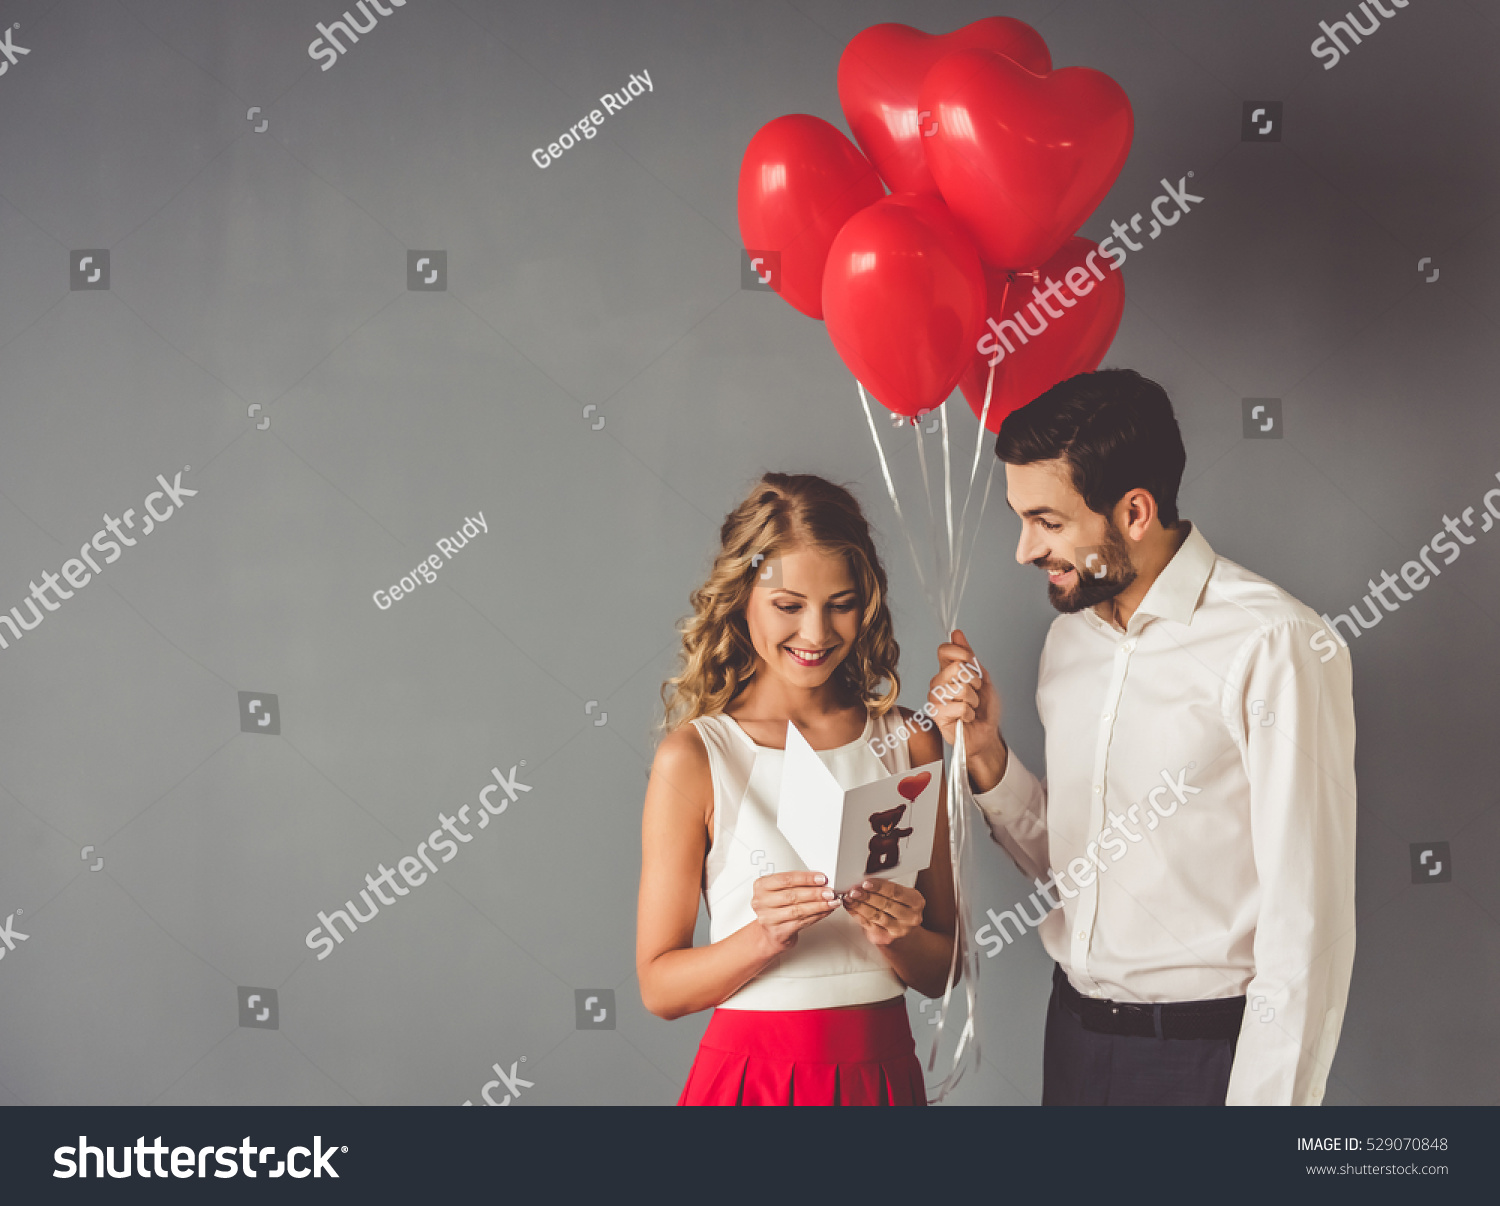 Handsome elegant guy is presenting a gift card and balloons to his beautiful girlfriend and smiling #529070848